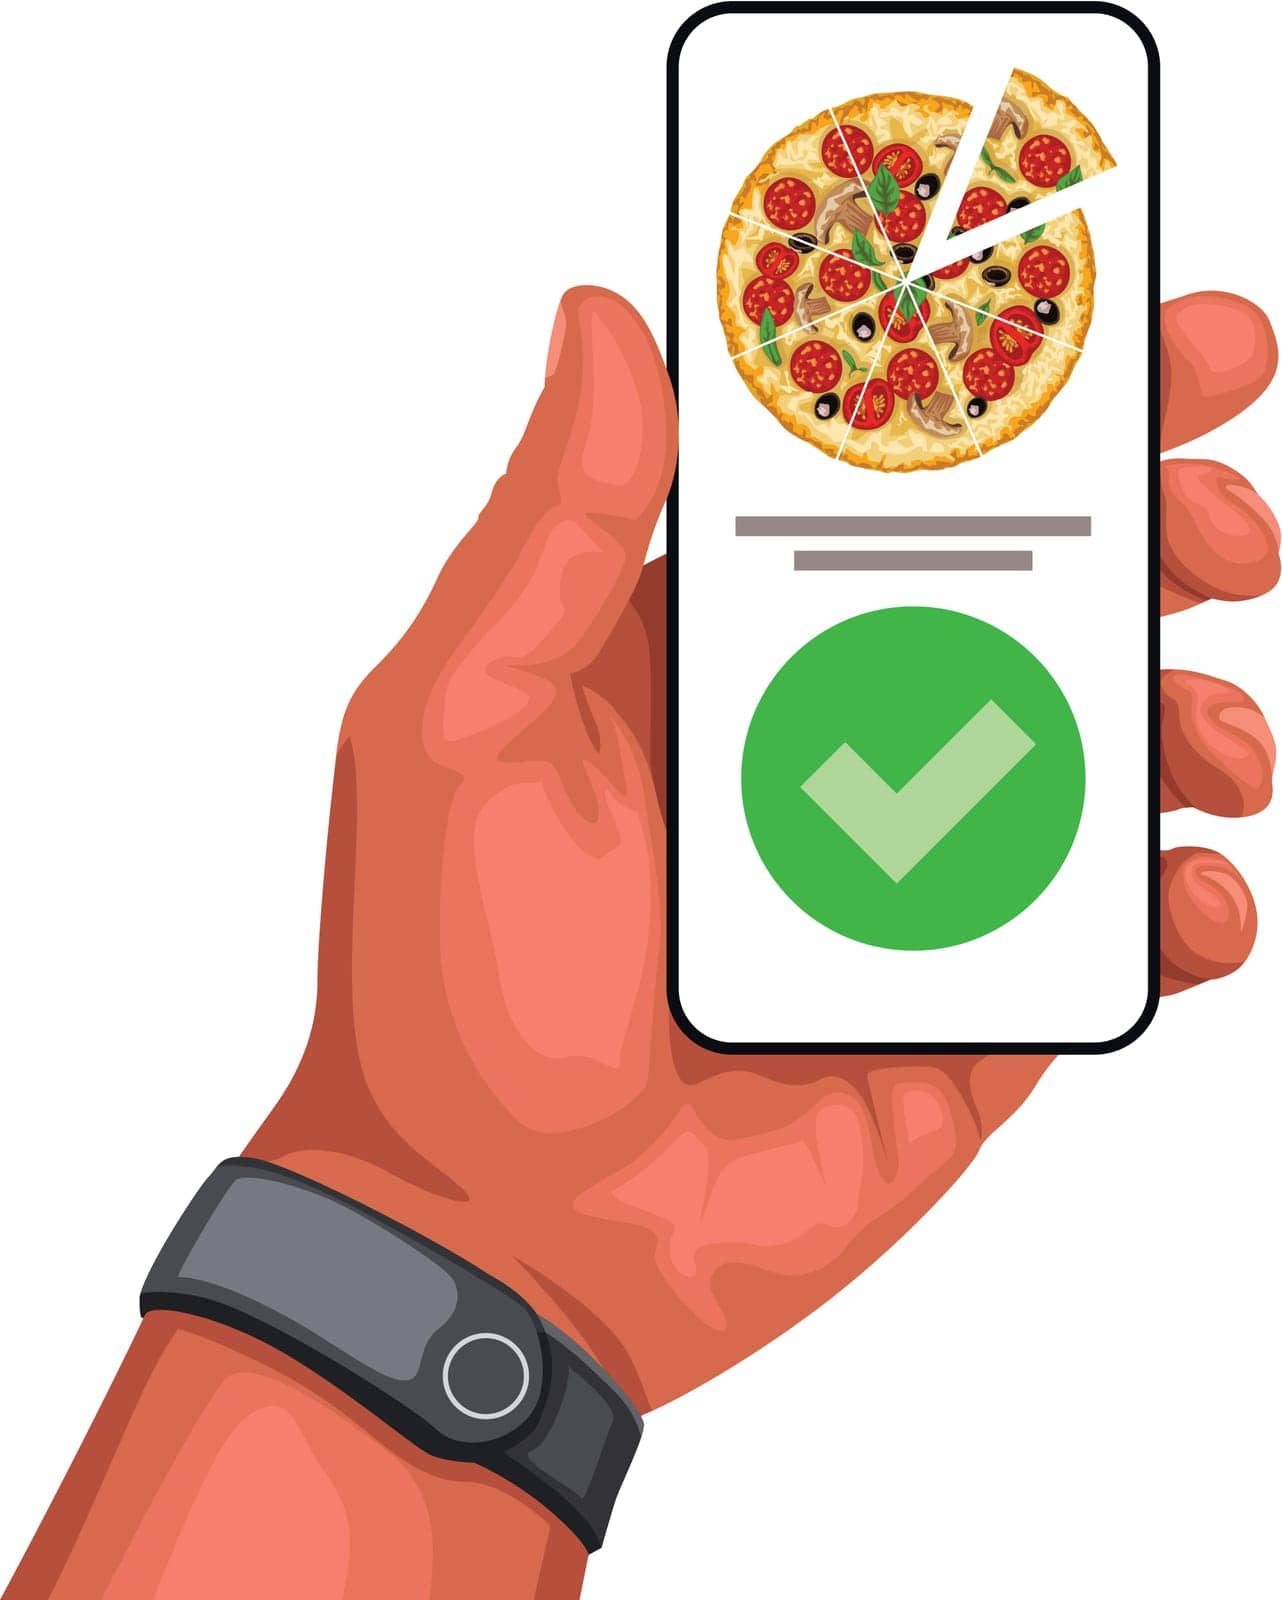 illustration of hand holding smartphone and success sign on screen with pizza